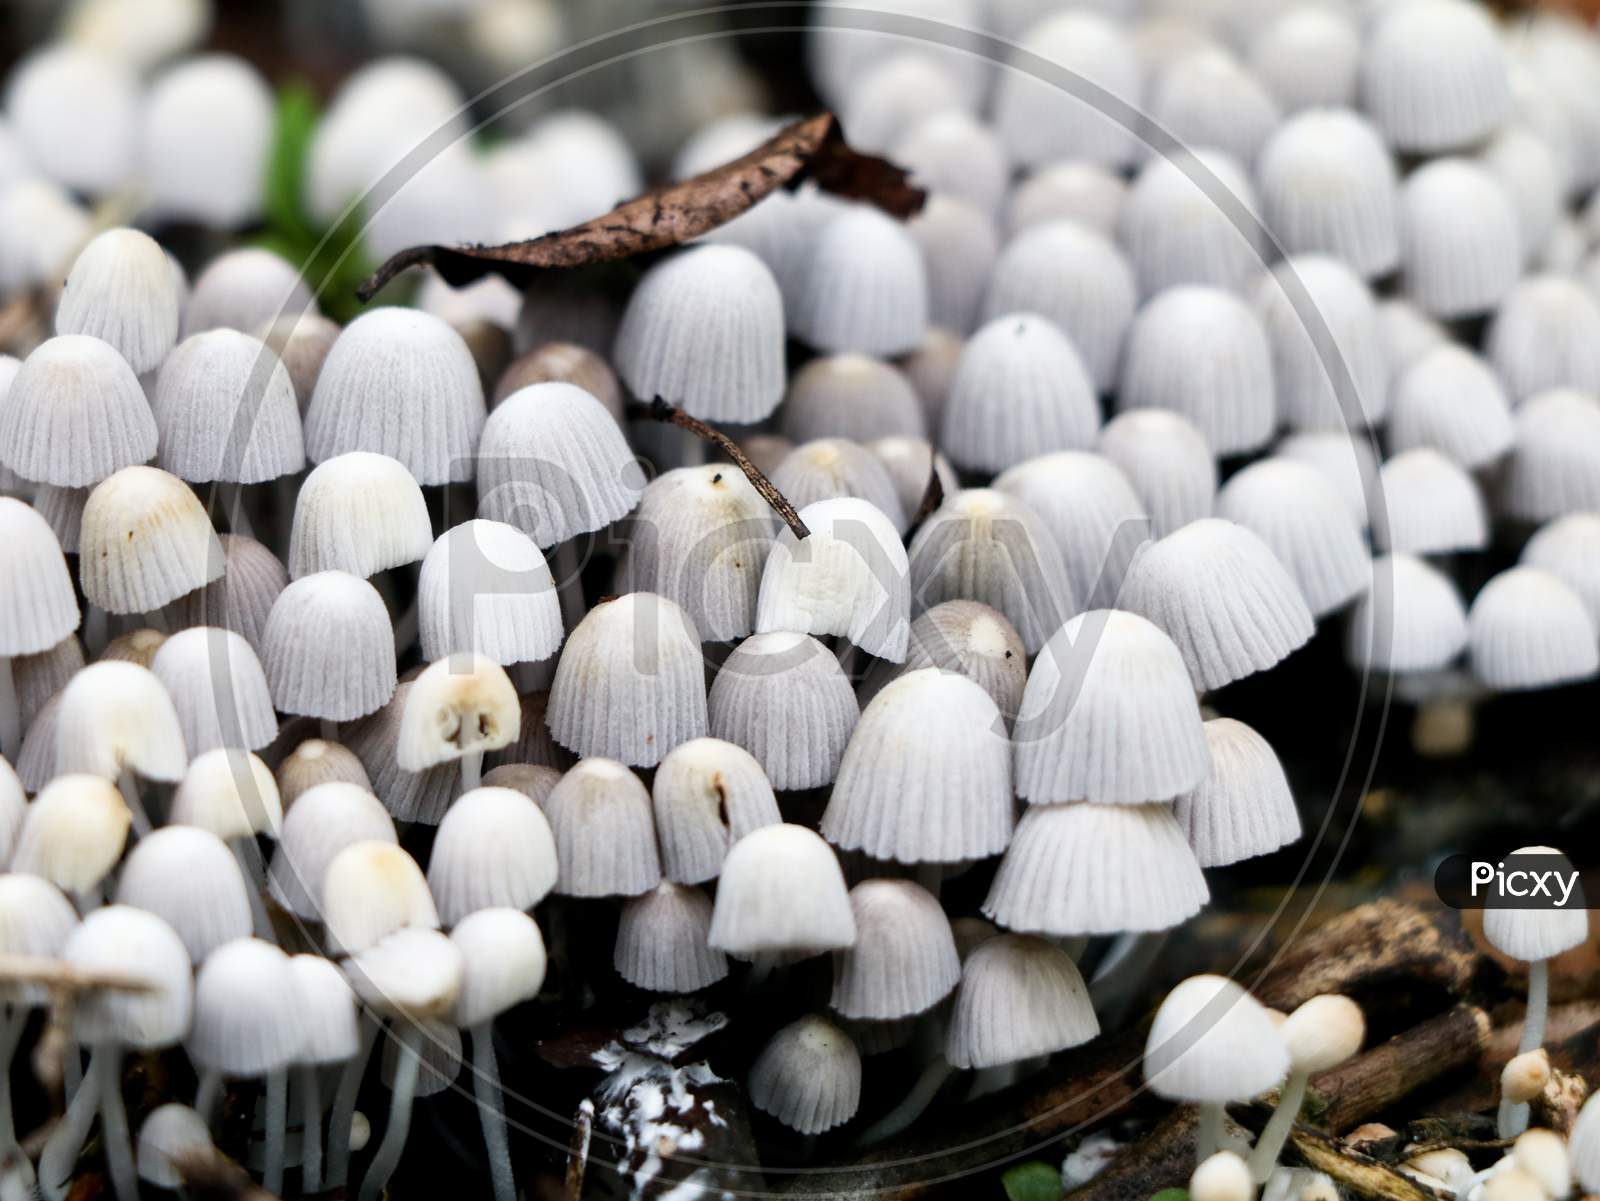 Tiny  White Color Mushrooms  Or Conks  On A Decaying Tree, Selective Focus